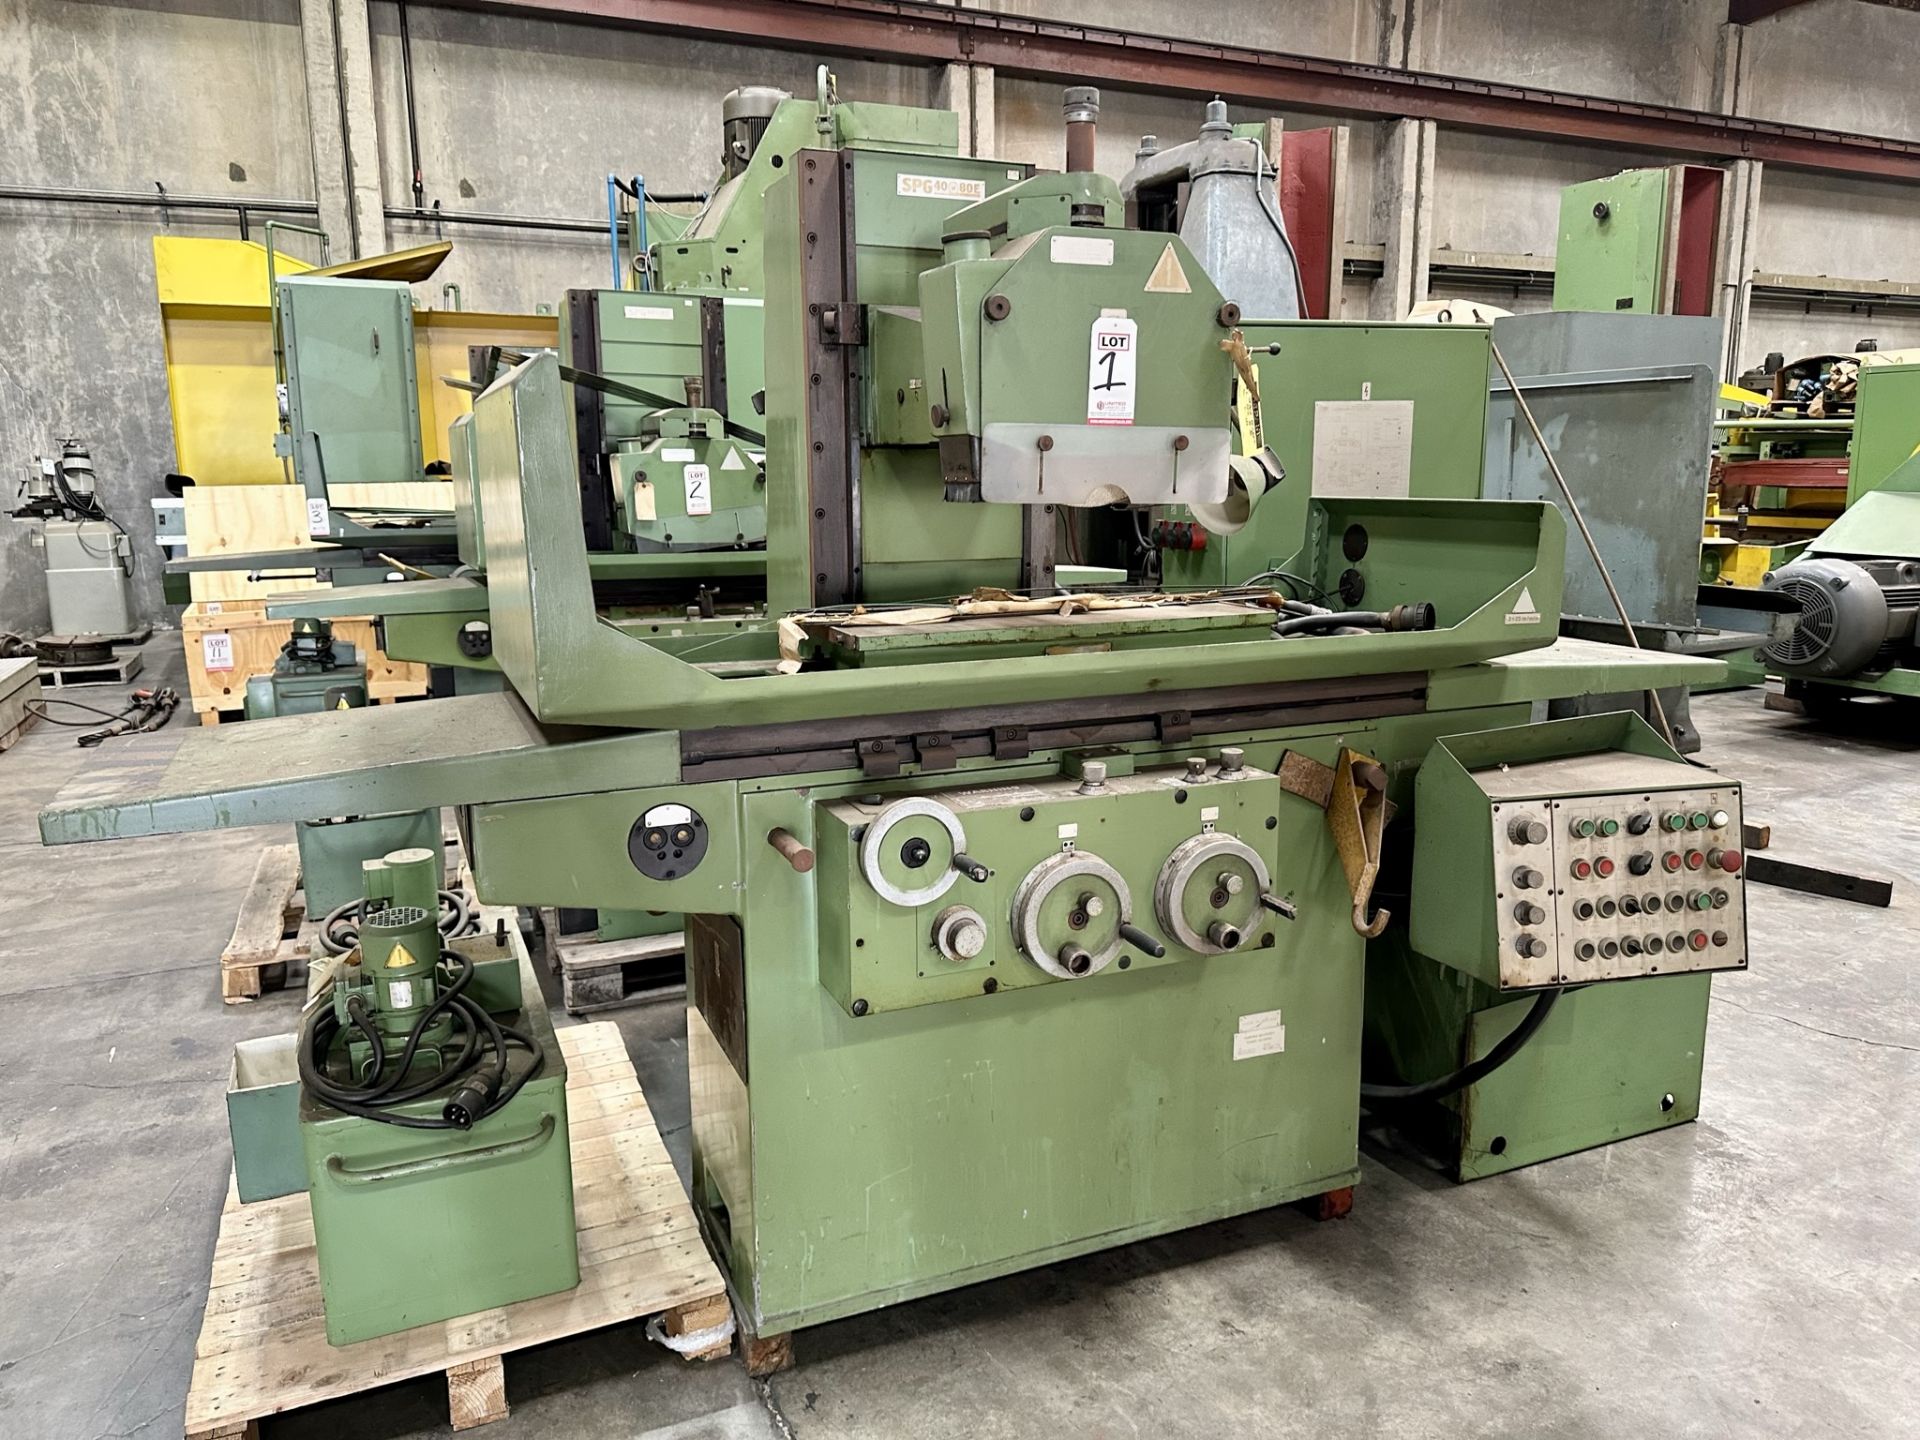 JOTES SURFACE GRINDER, FABRYKA SZLIFIEREK, TYPE SPG 40 X 80 E, 16" X 32" MAGNETIC CHUCK, S/N 51/ - Image 2 of 15